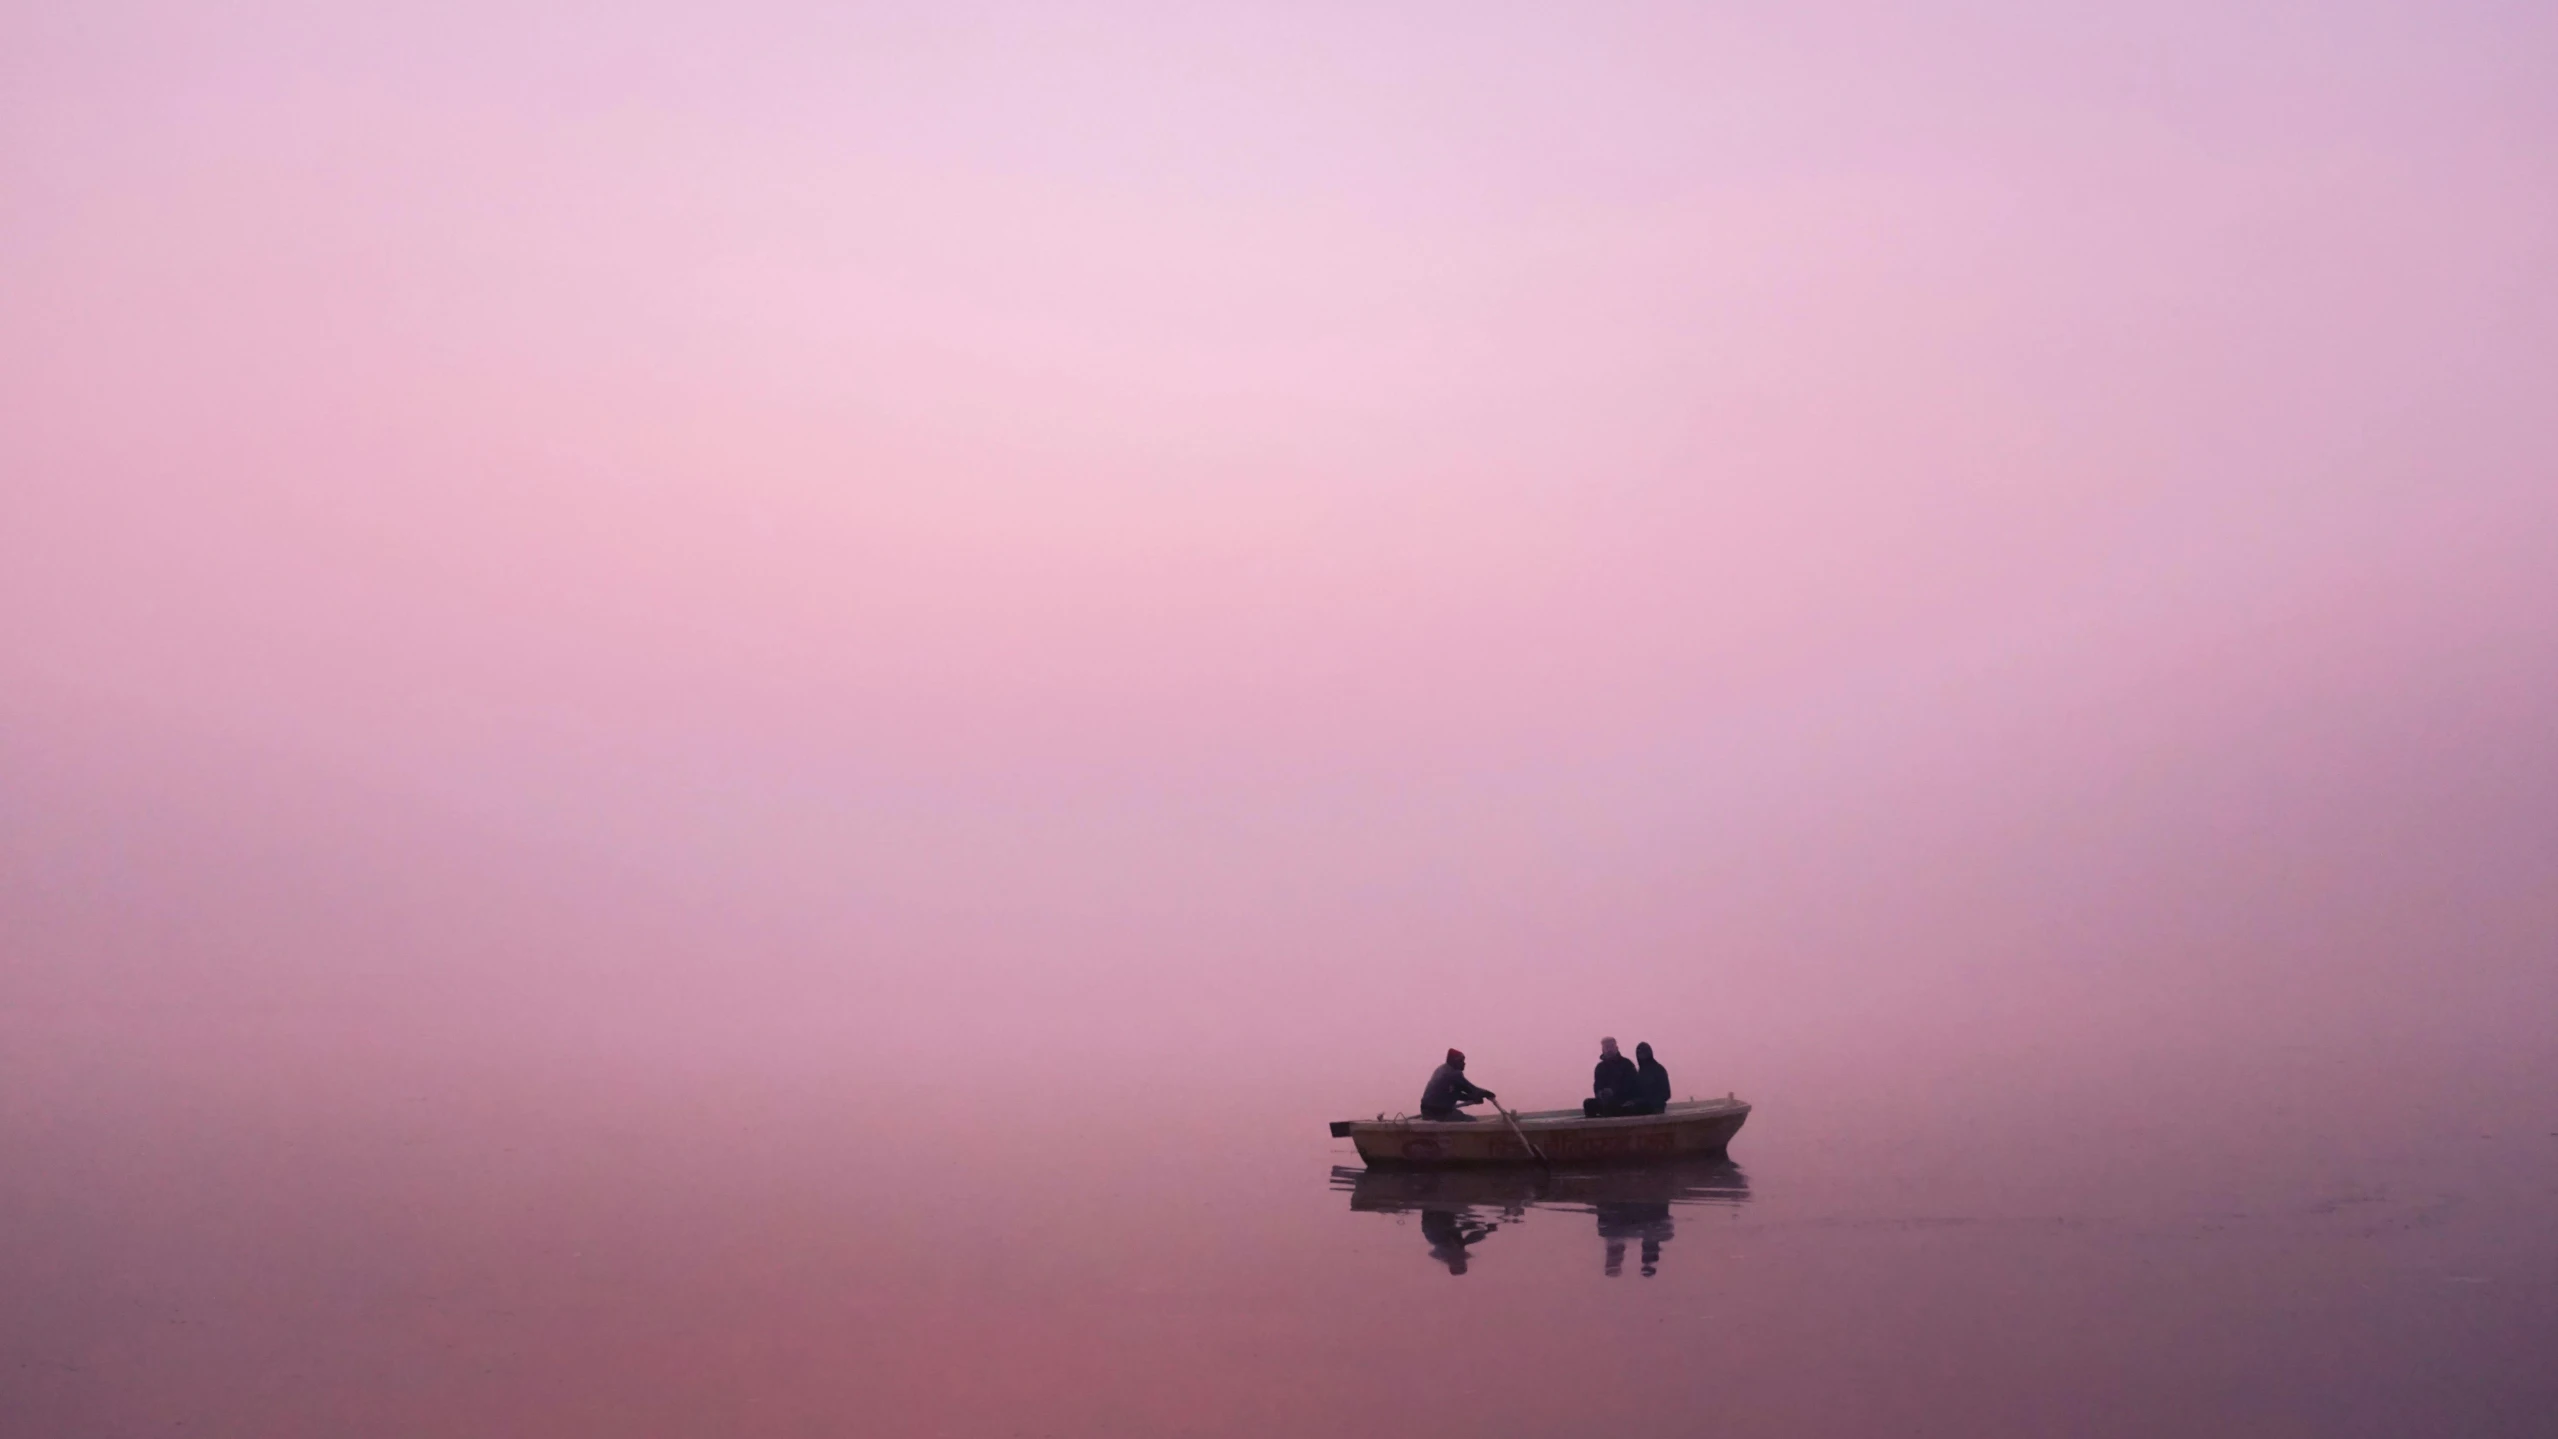 three people in a small boat on a misty river